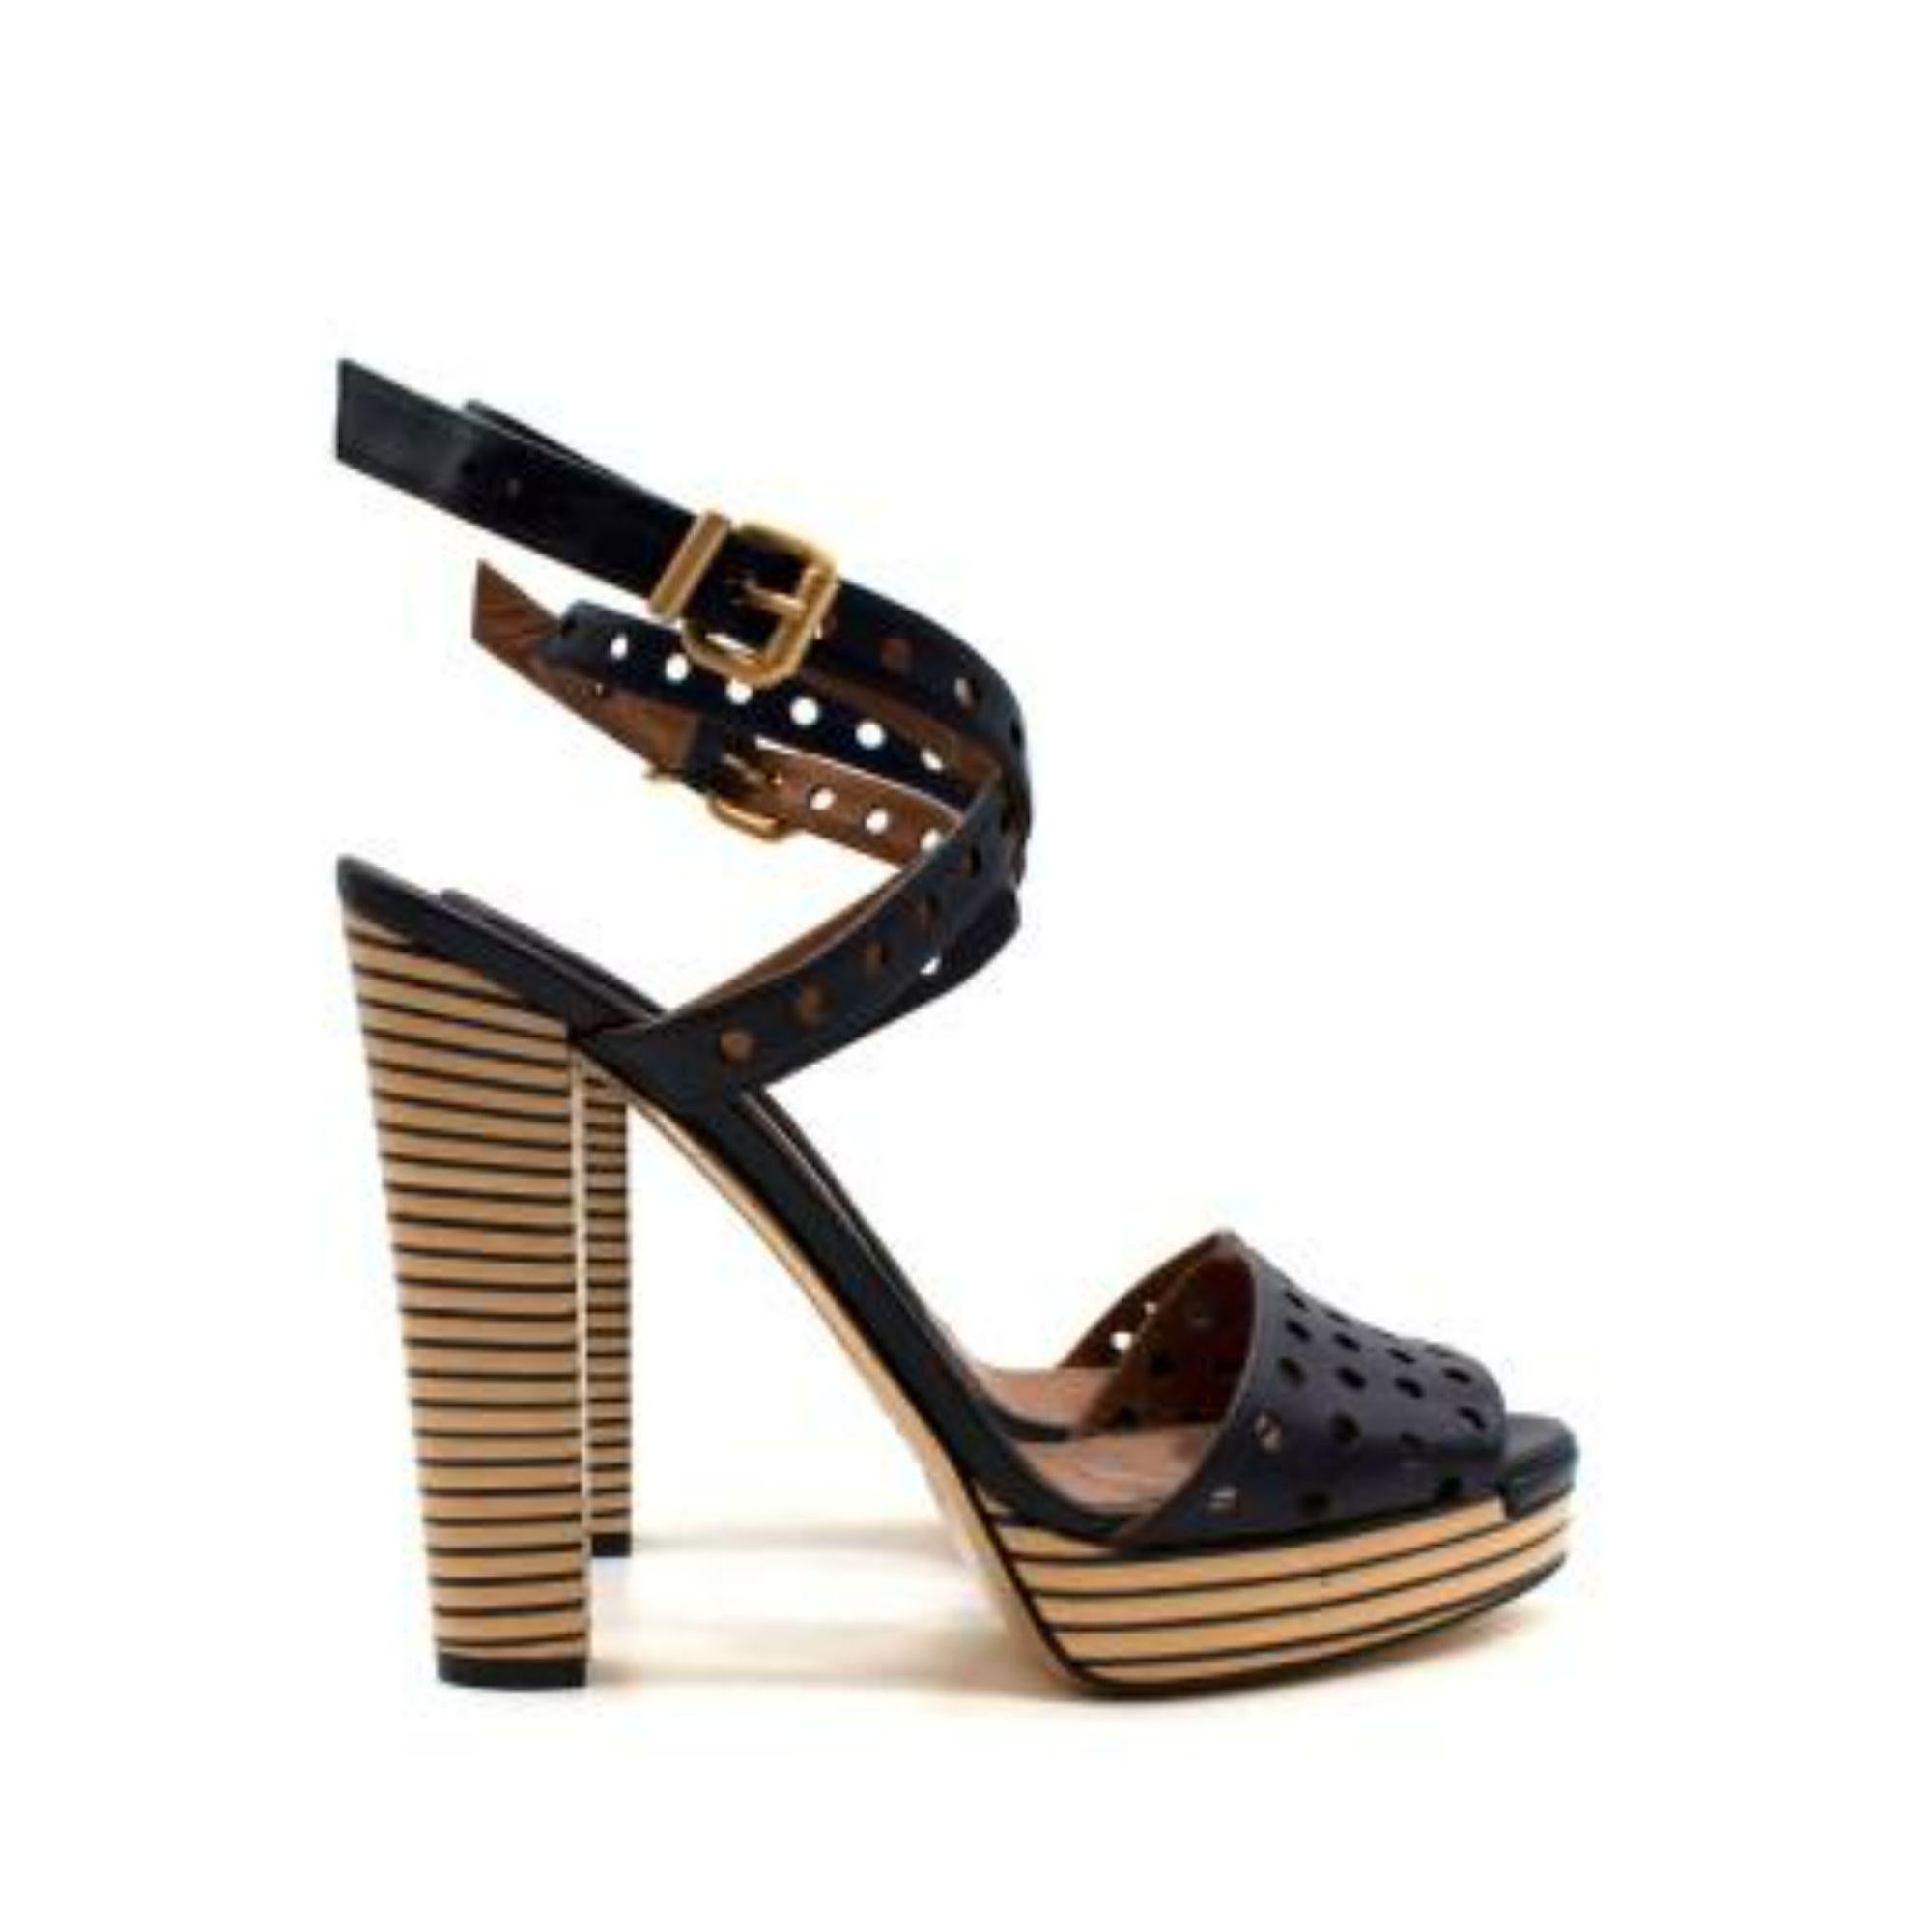 Fendi Purple Stripped Heel Perforated Heel

-Perforated Strap 
-Striped block heel 
-Ankle fastening 
-Open Heel 
-Striped platform 

Material: 

Leather 

Made in Italy 

9.5/10 excellent conditions, please refer to images for further details.